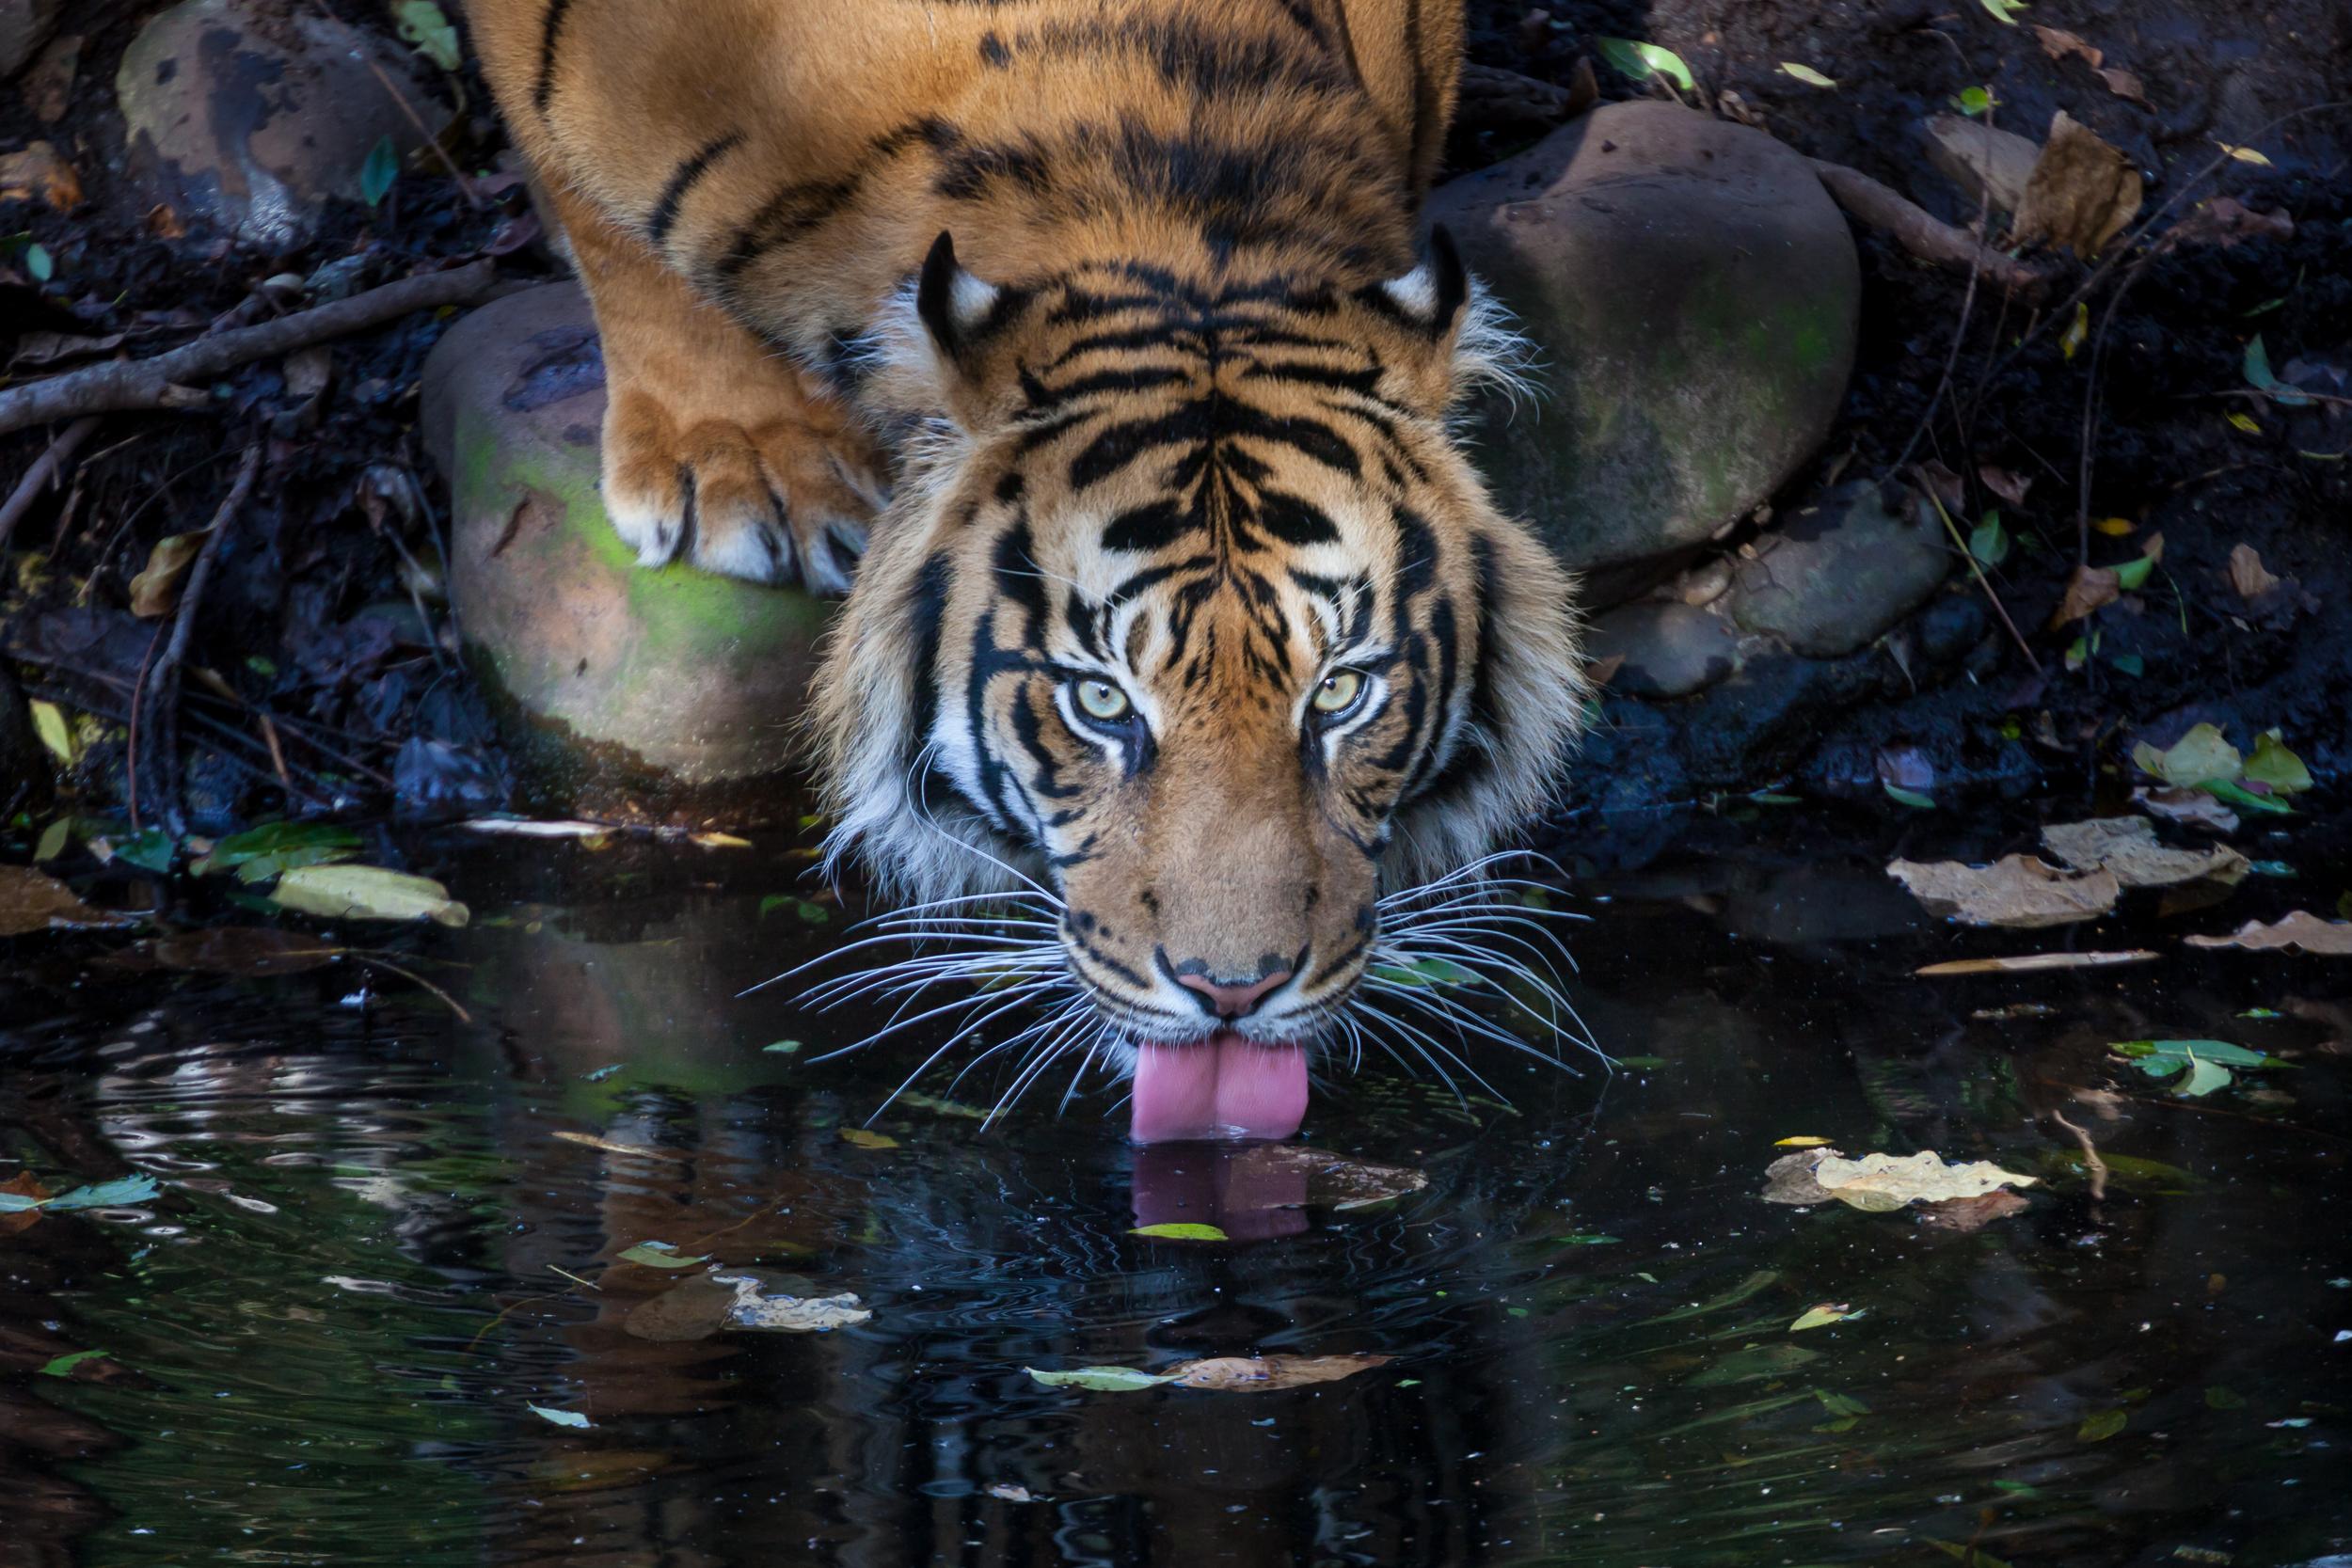 Tiger with markings visible on forehead drinking water